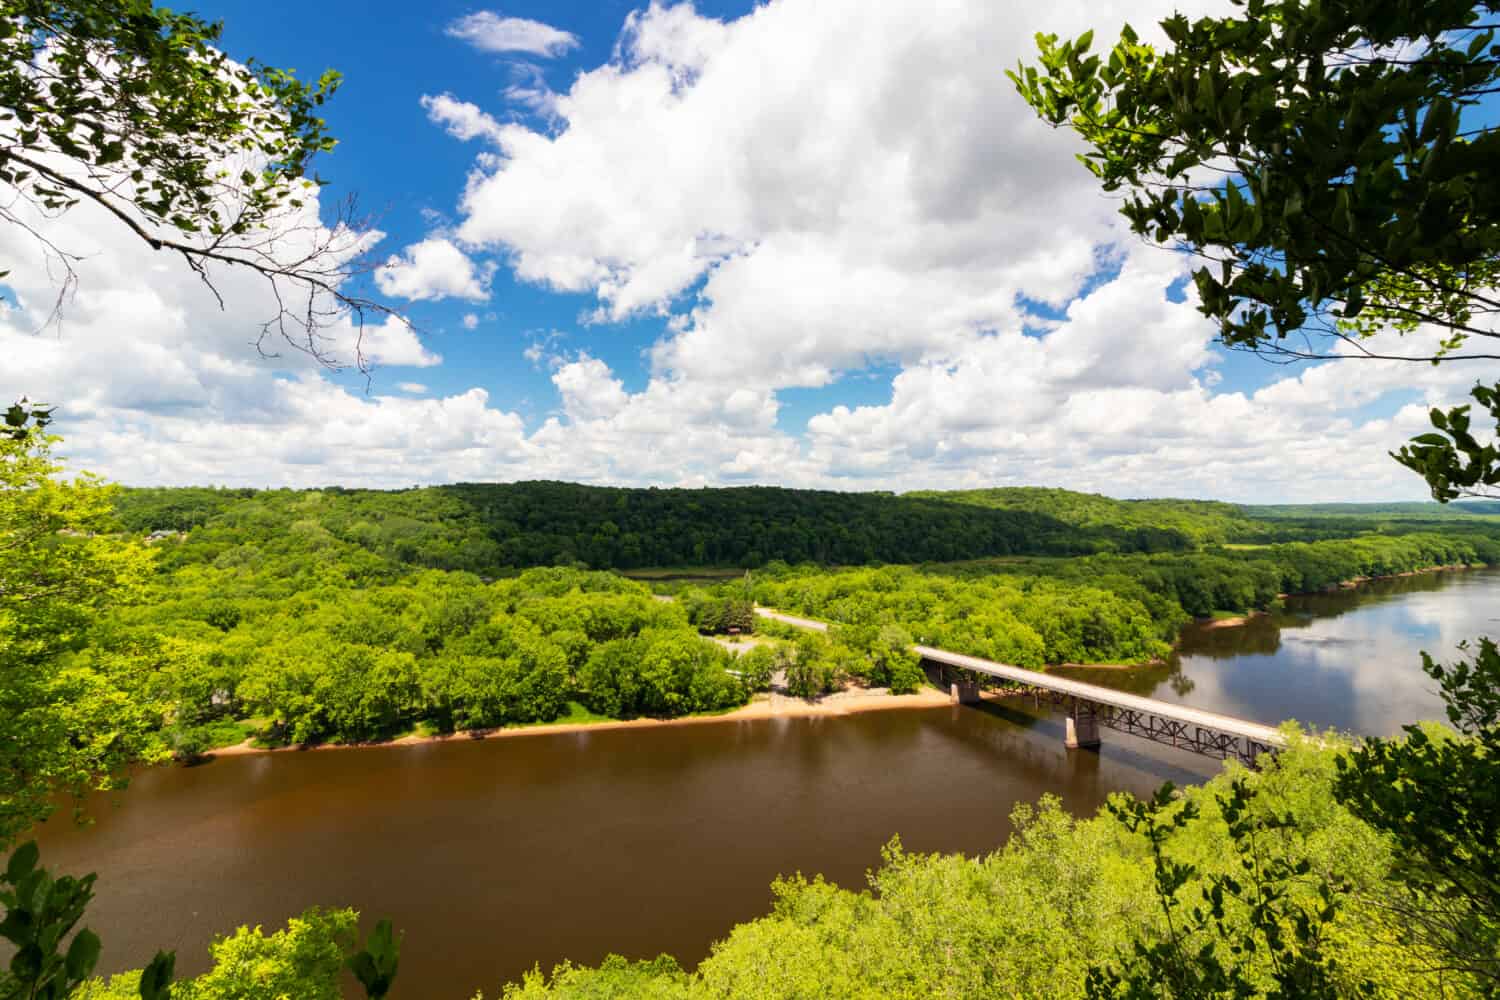 View of the St. Croix River Valley looking toward Minnesota from near Osceola, Wisconsin